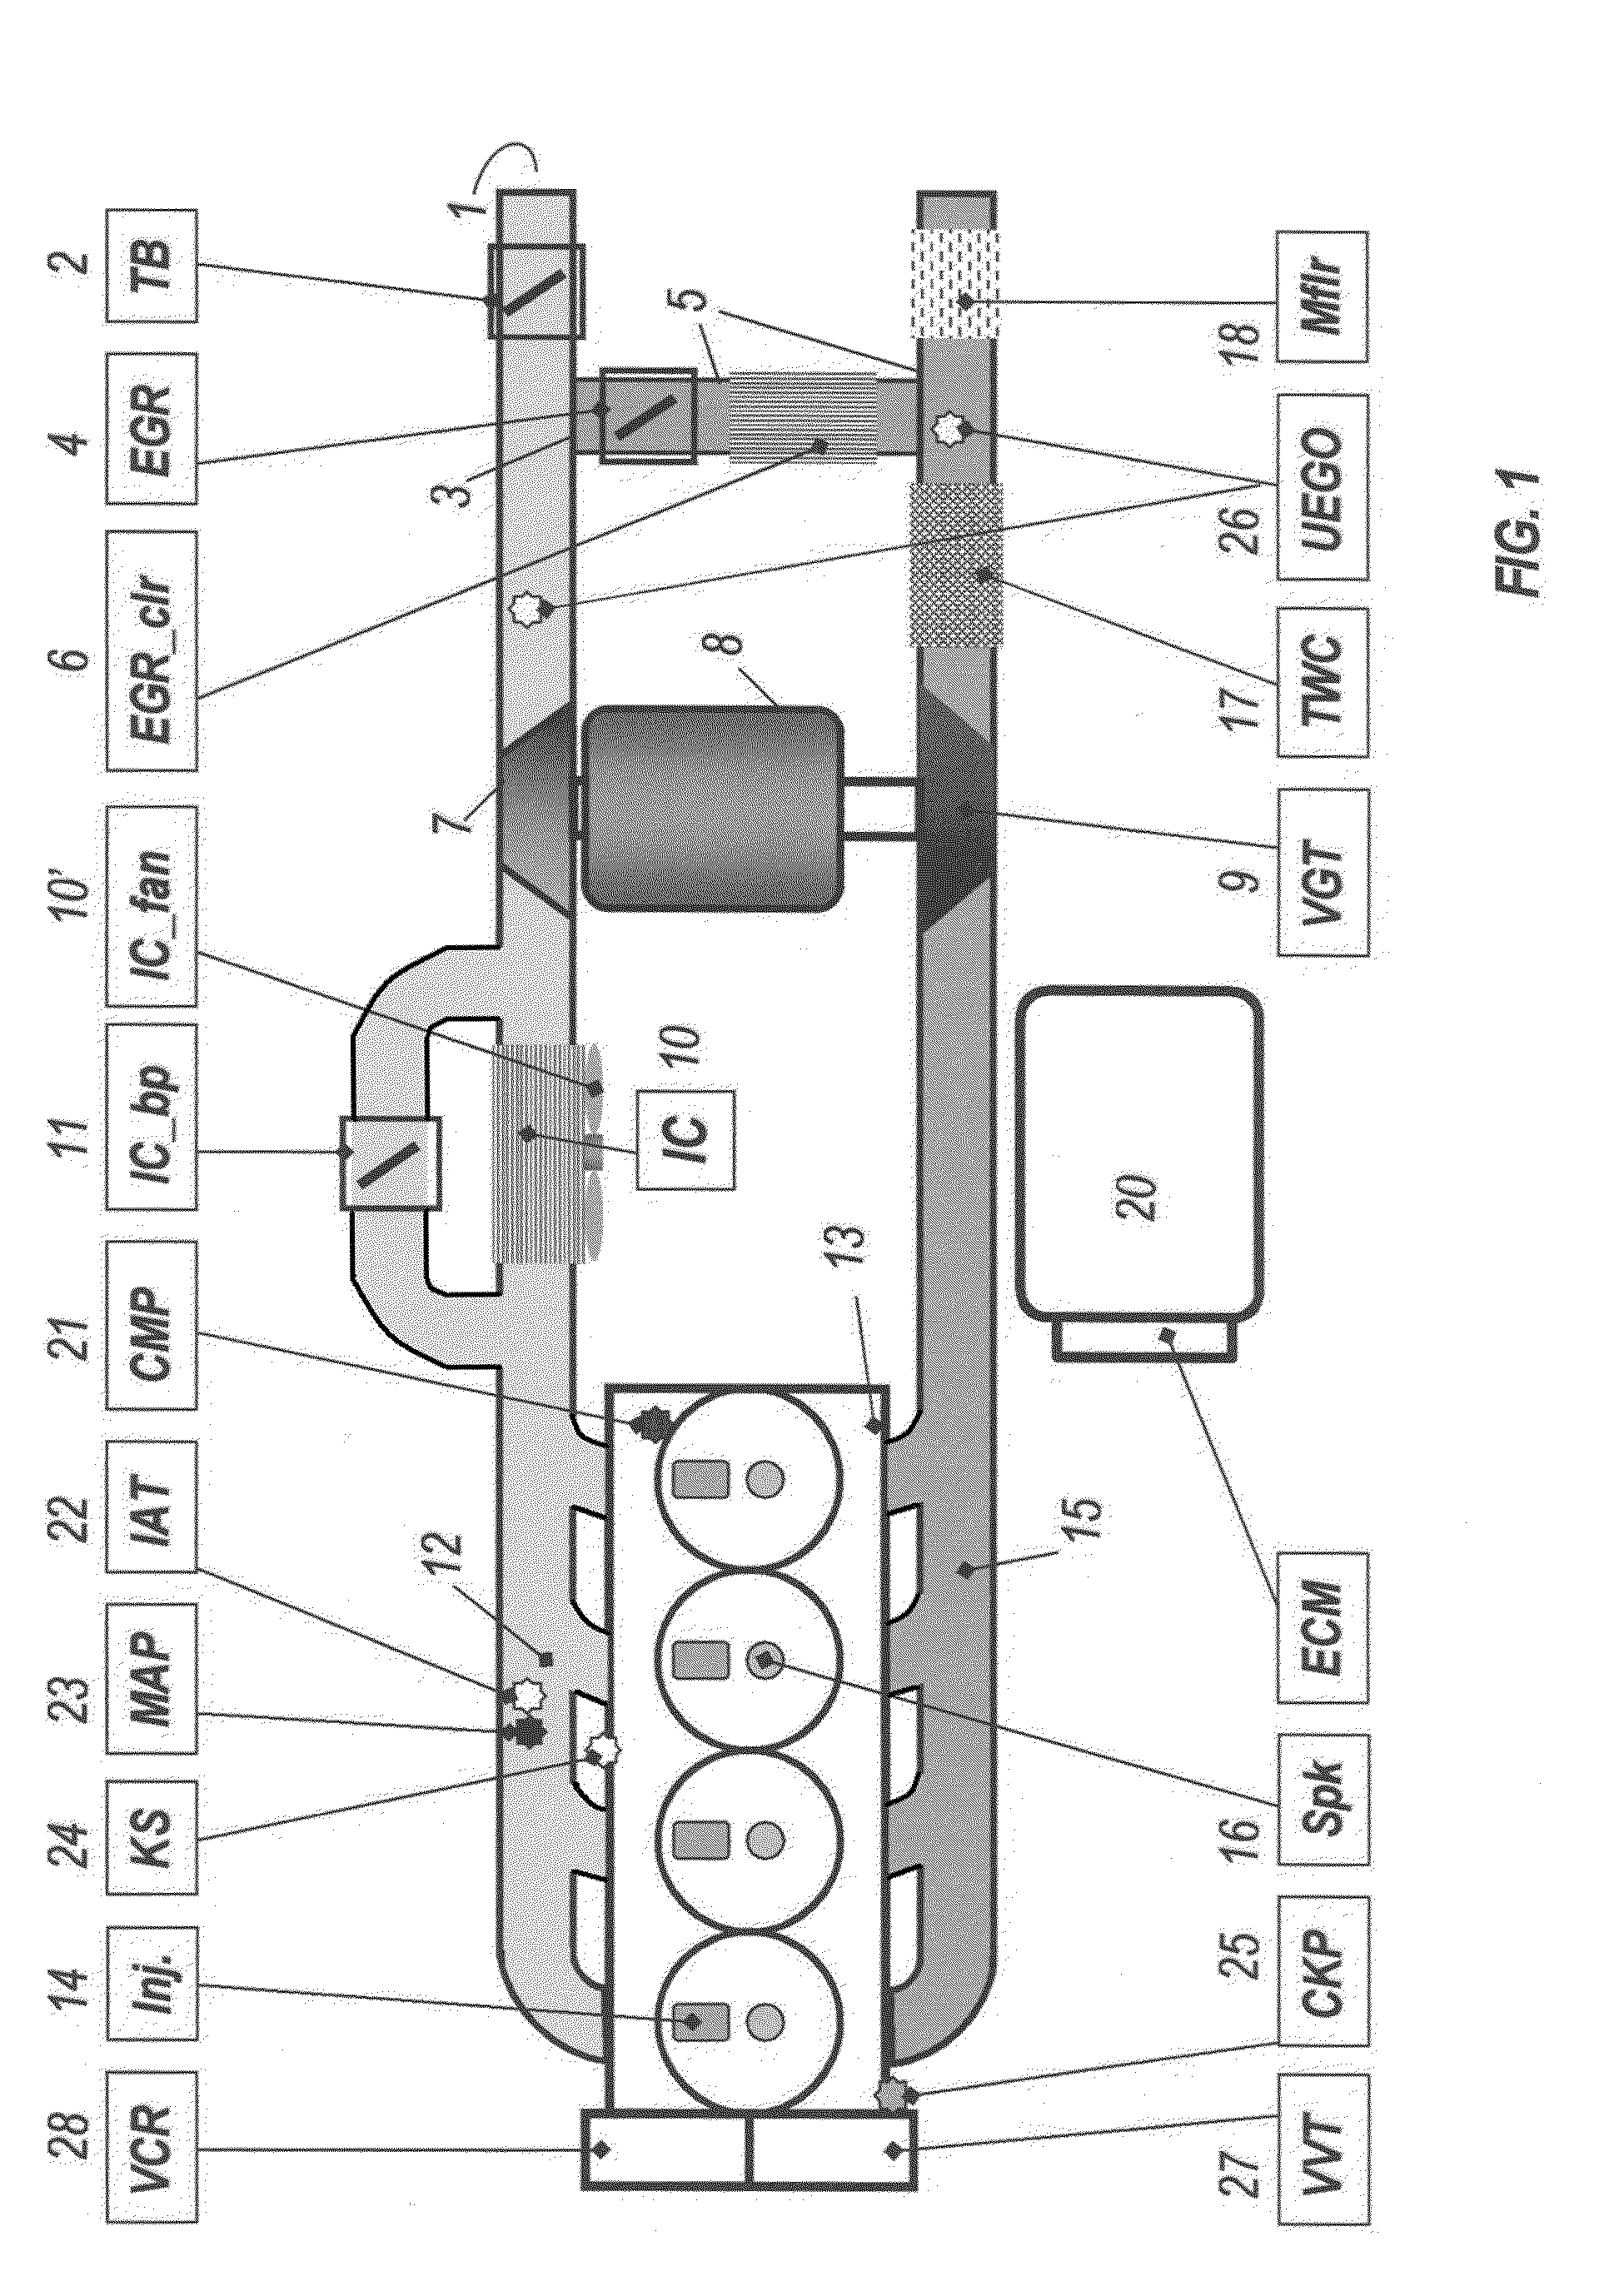 Method and system of transient control for homogeneous charge compression ignition (HCCI) engines